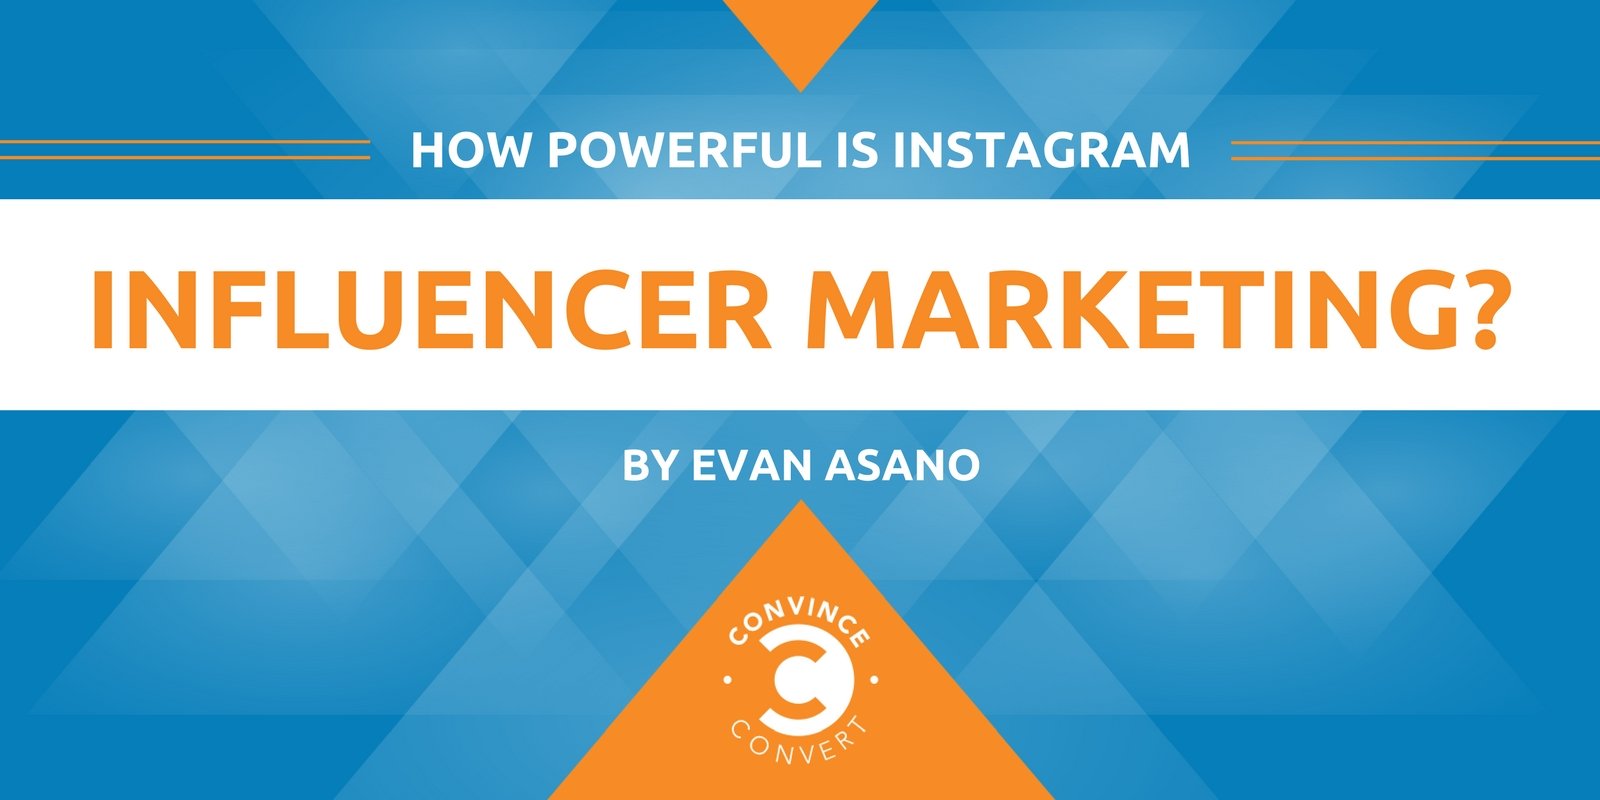 How Powerful Is Instagram Influencer Marketing? [Infographic]